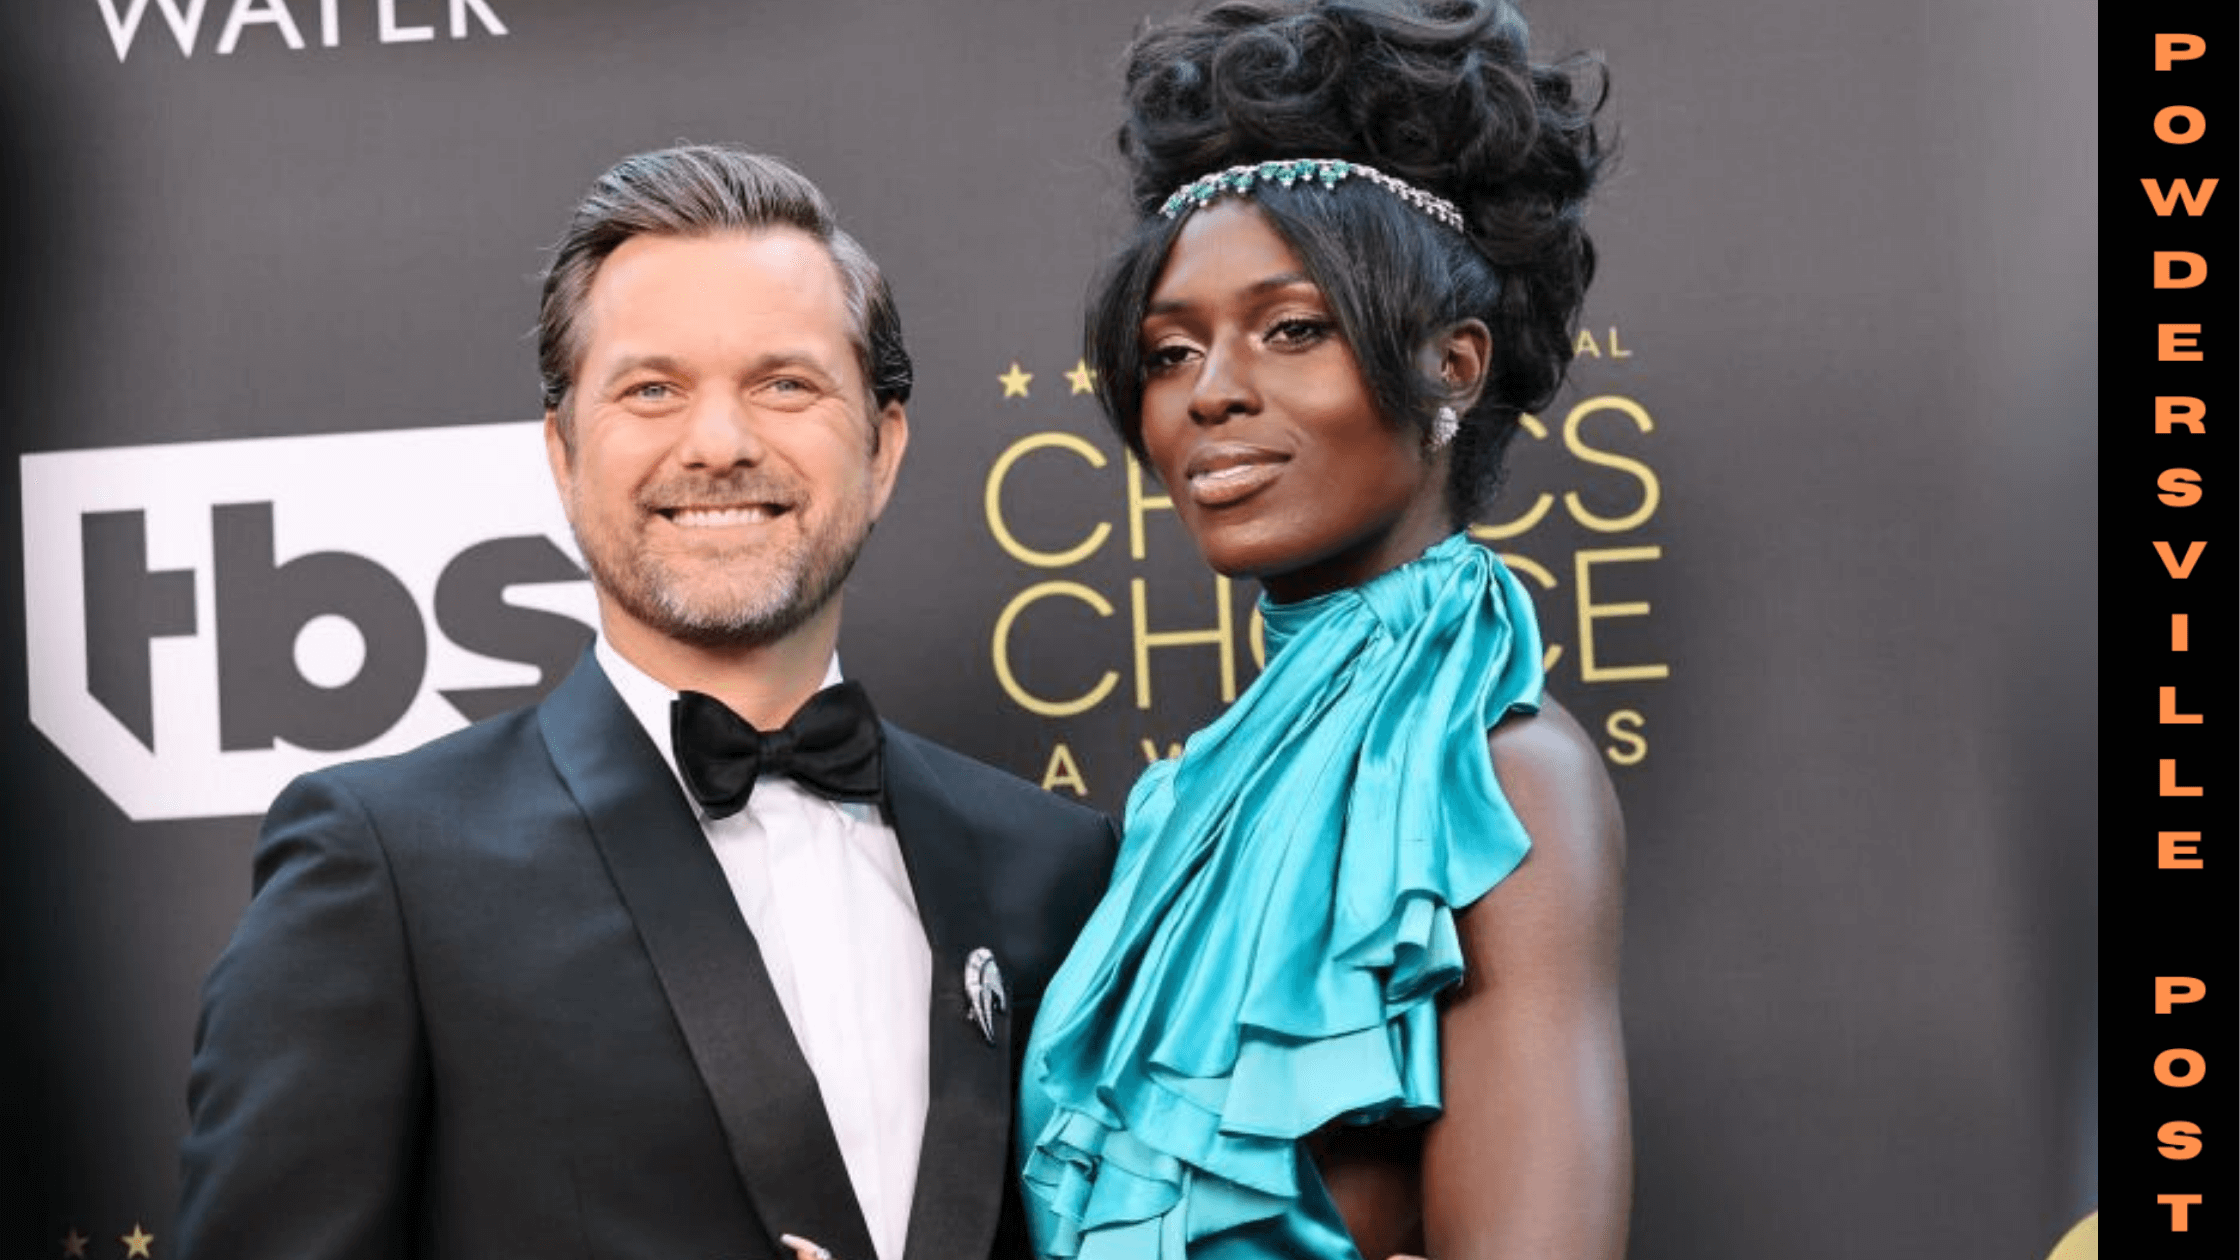 What Was Joshua Jackson's Cheeky Response To Jodie Turner-Smith's Nude Photo Ahead Of The Critics Choice Awards